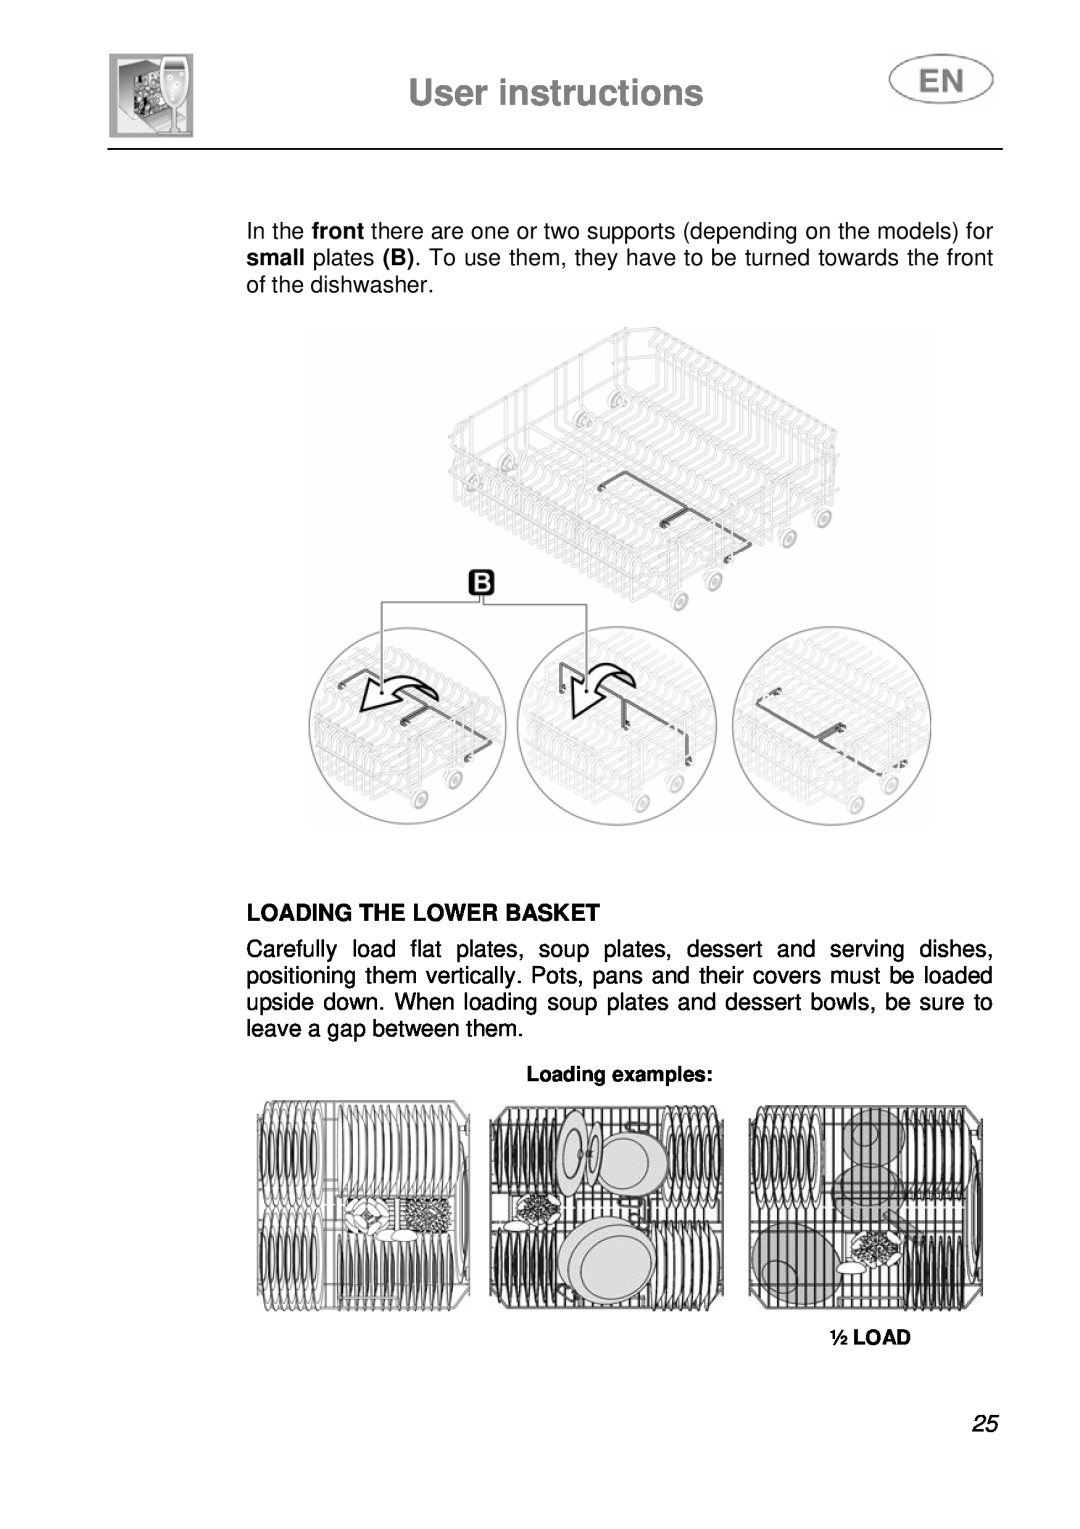 Smeg LS19-7 instruction manual User instructions, Loading The Lower Basket, Loading examples ½ LOAD 